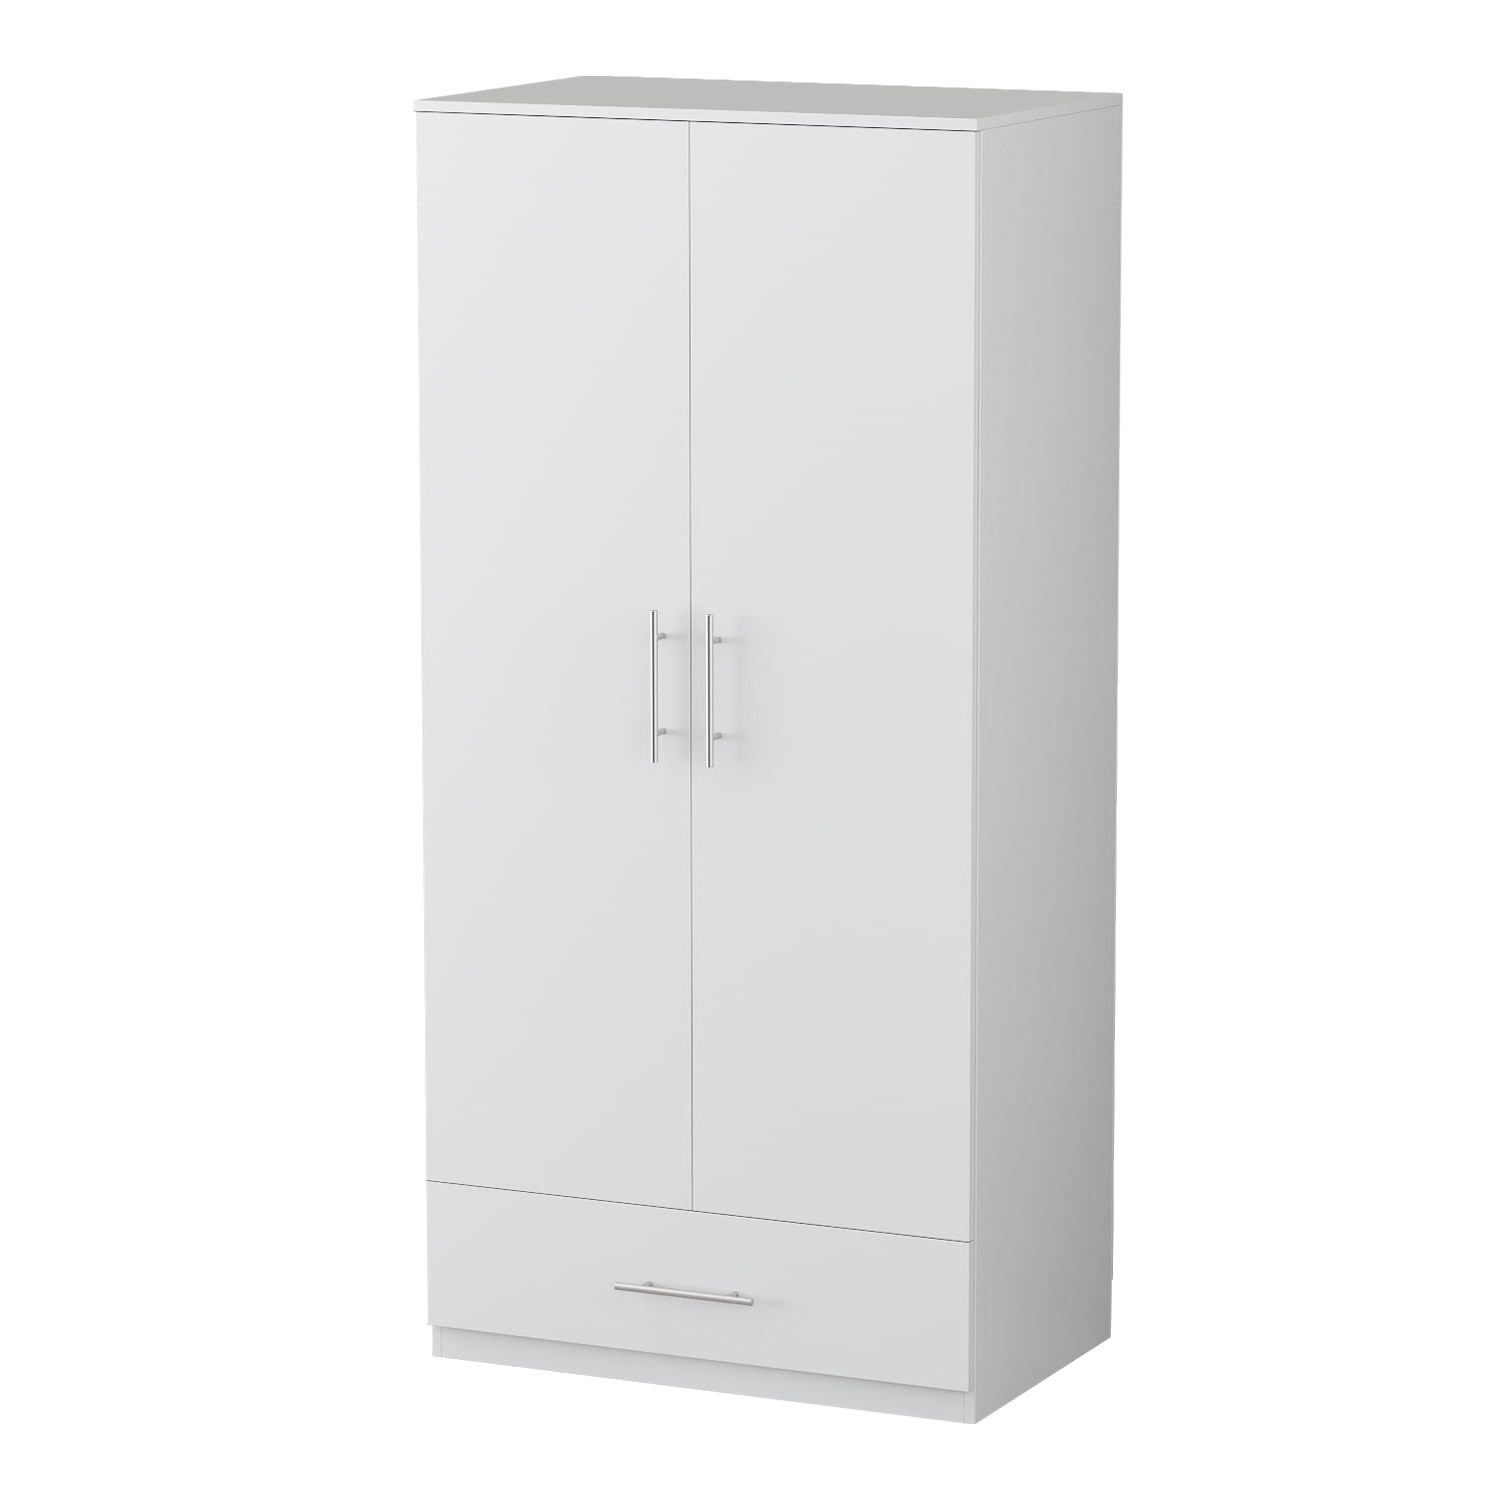 2 Door Armoire Wardrobe Cabinet With Drawer For Bedroom White – Walmart For Two Door White Wardrobes (View 5 of 20)